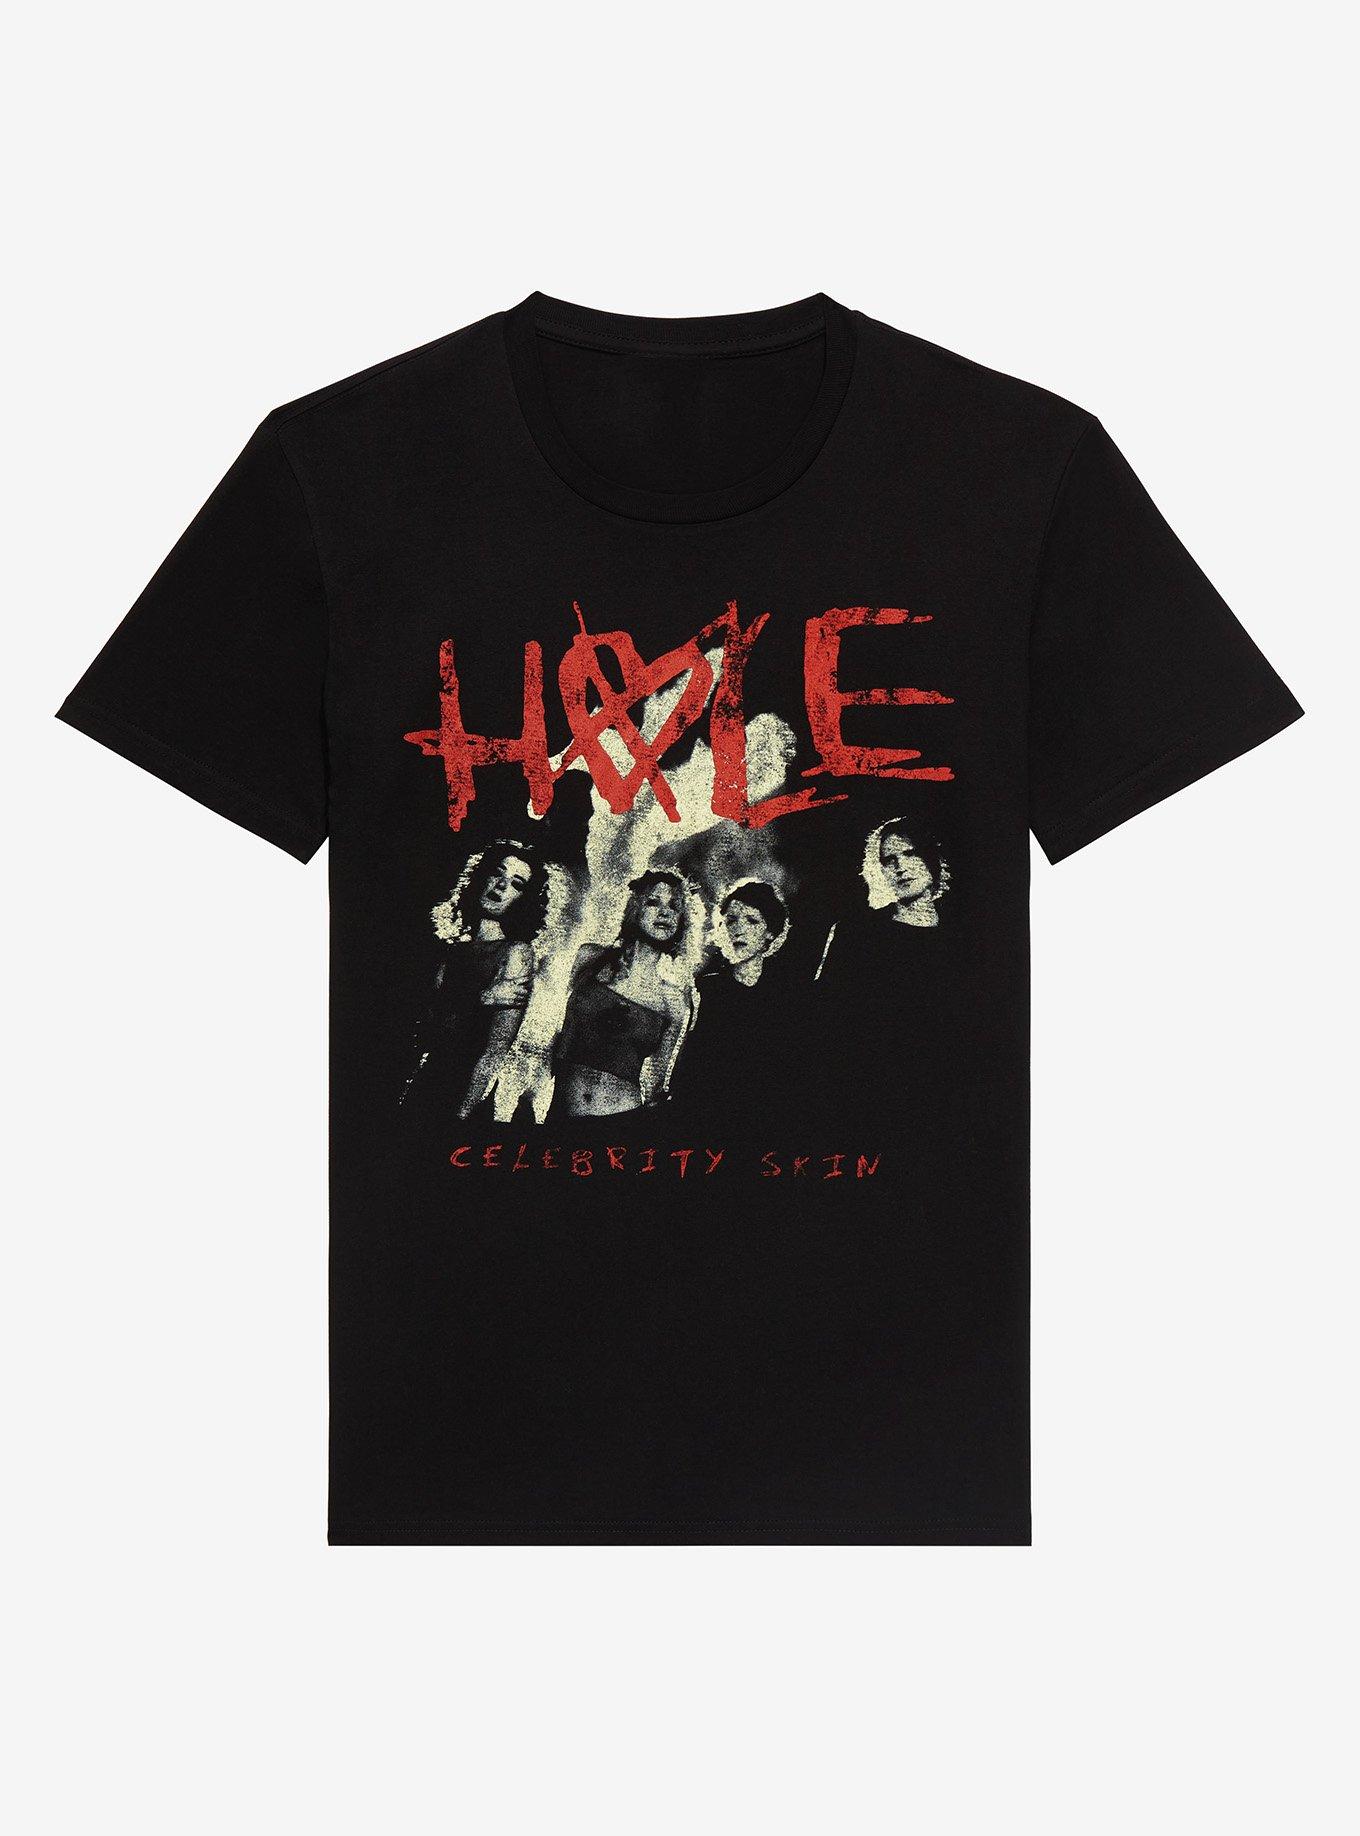 Huk Hole T-Shirts for Men